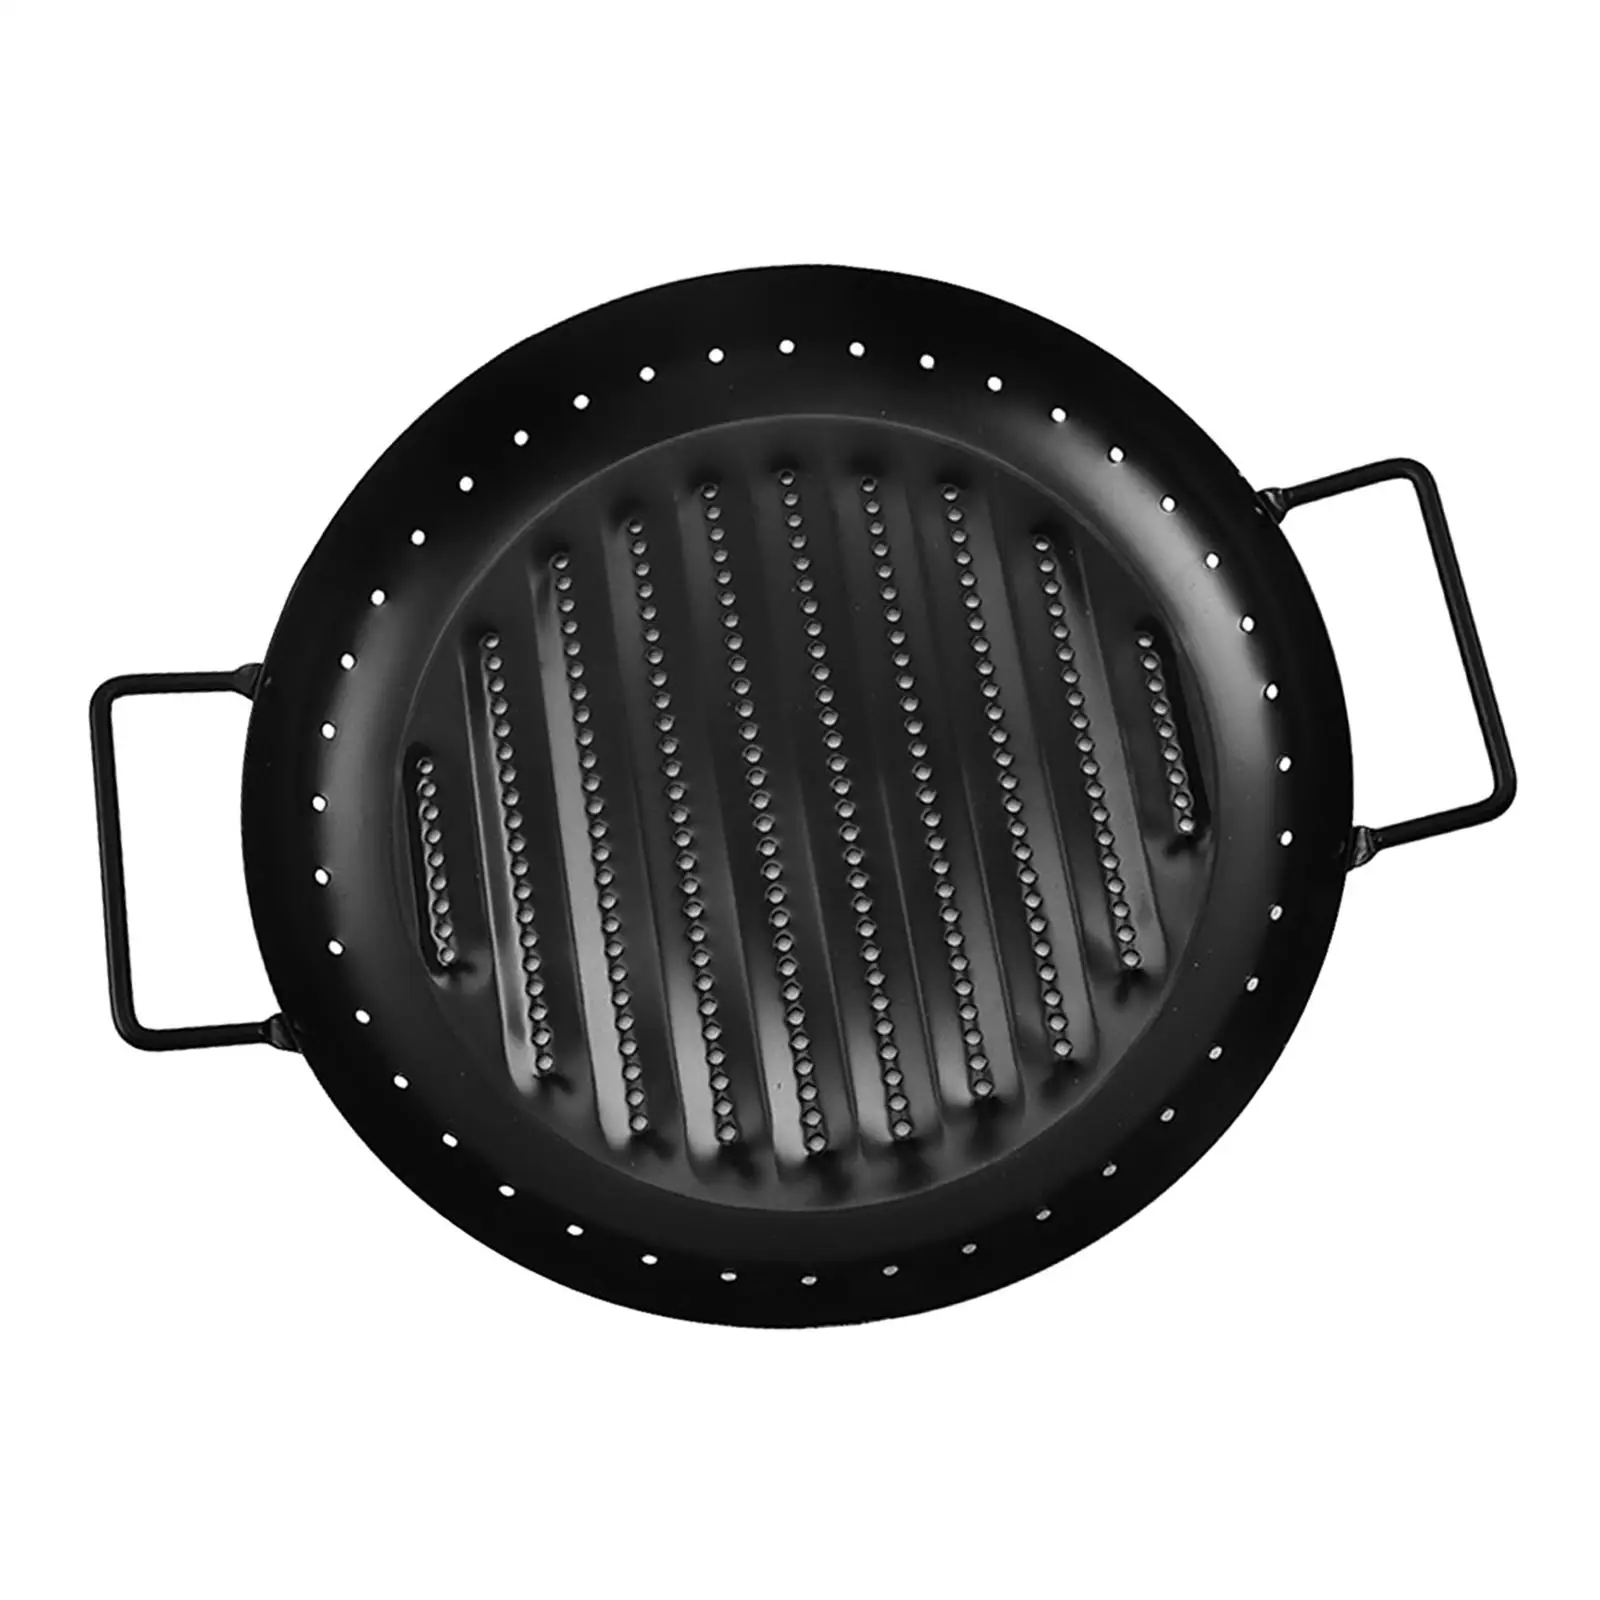 BBQ Grilling Pan Grill Topper Pans Durable BBQ Accessories Grill Tray Grill Basket for Cooking BBQ Camping Meat